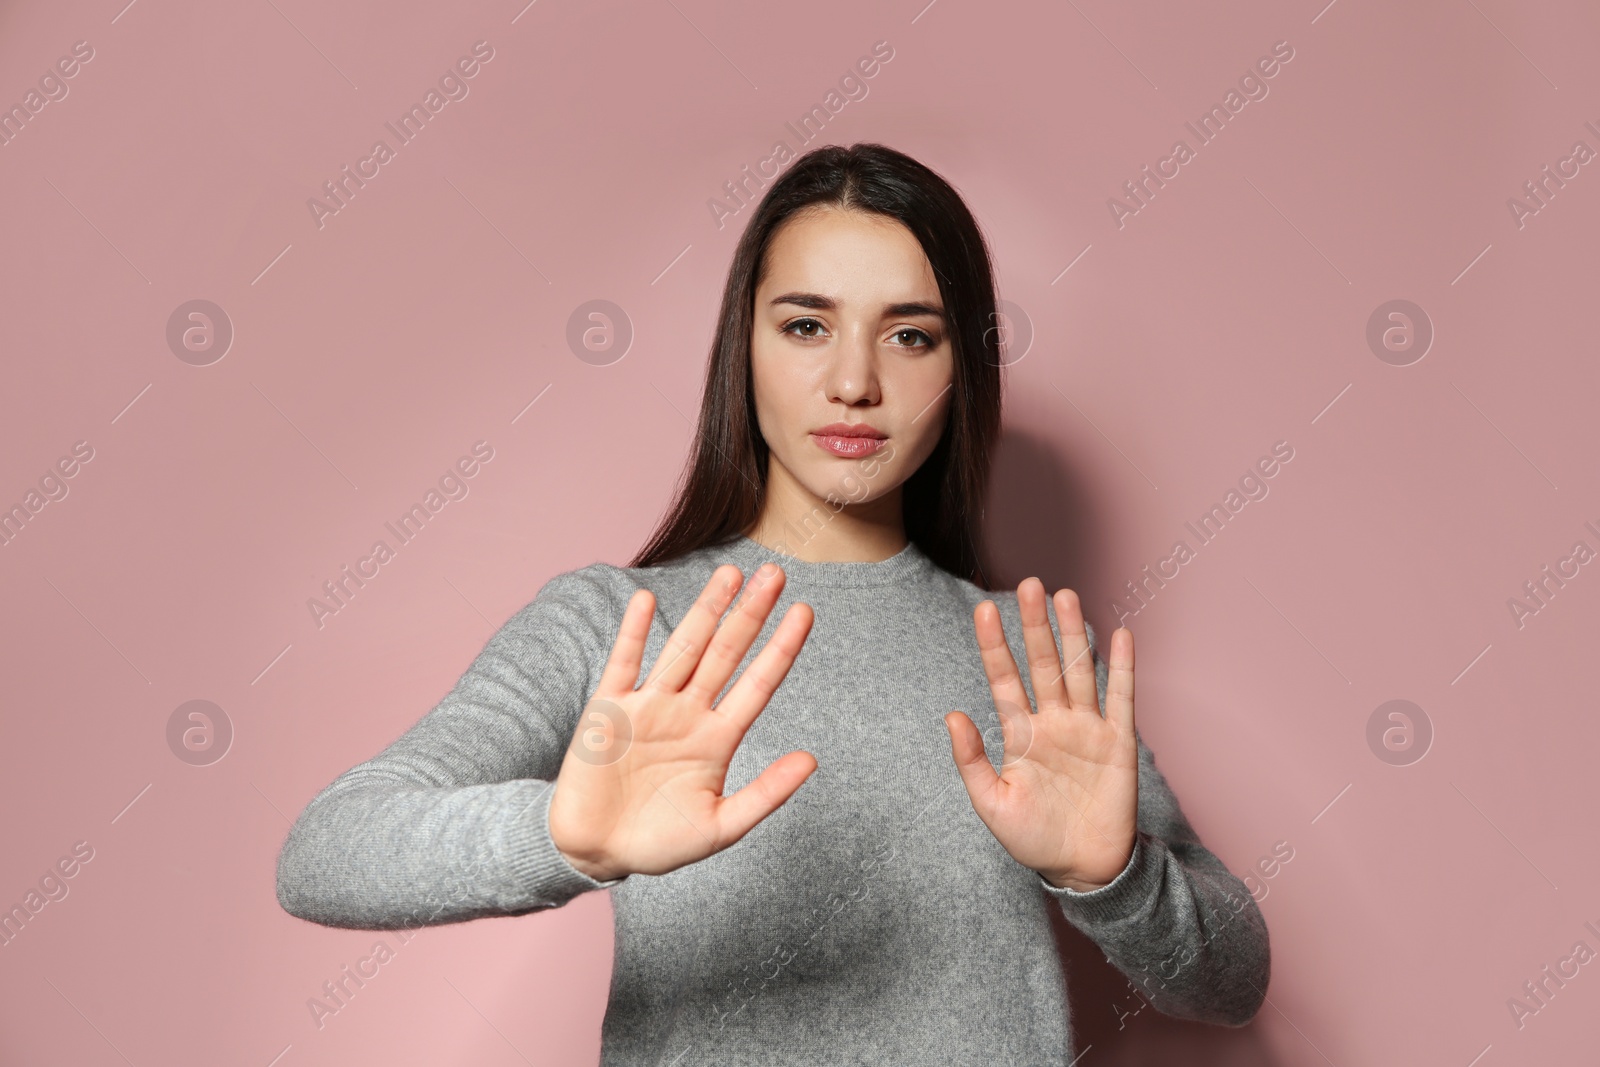 Photo of Woman showing STOP gesture in sign language on color background